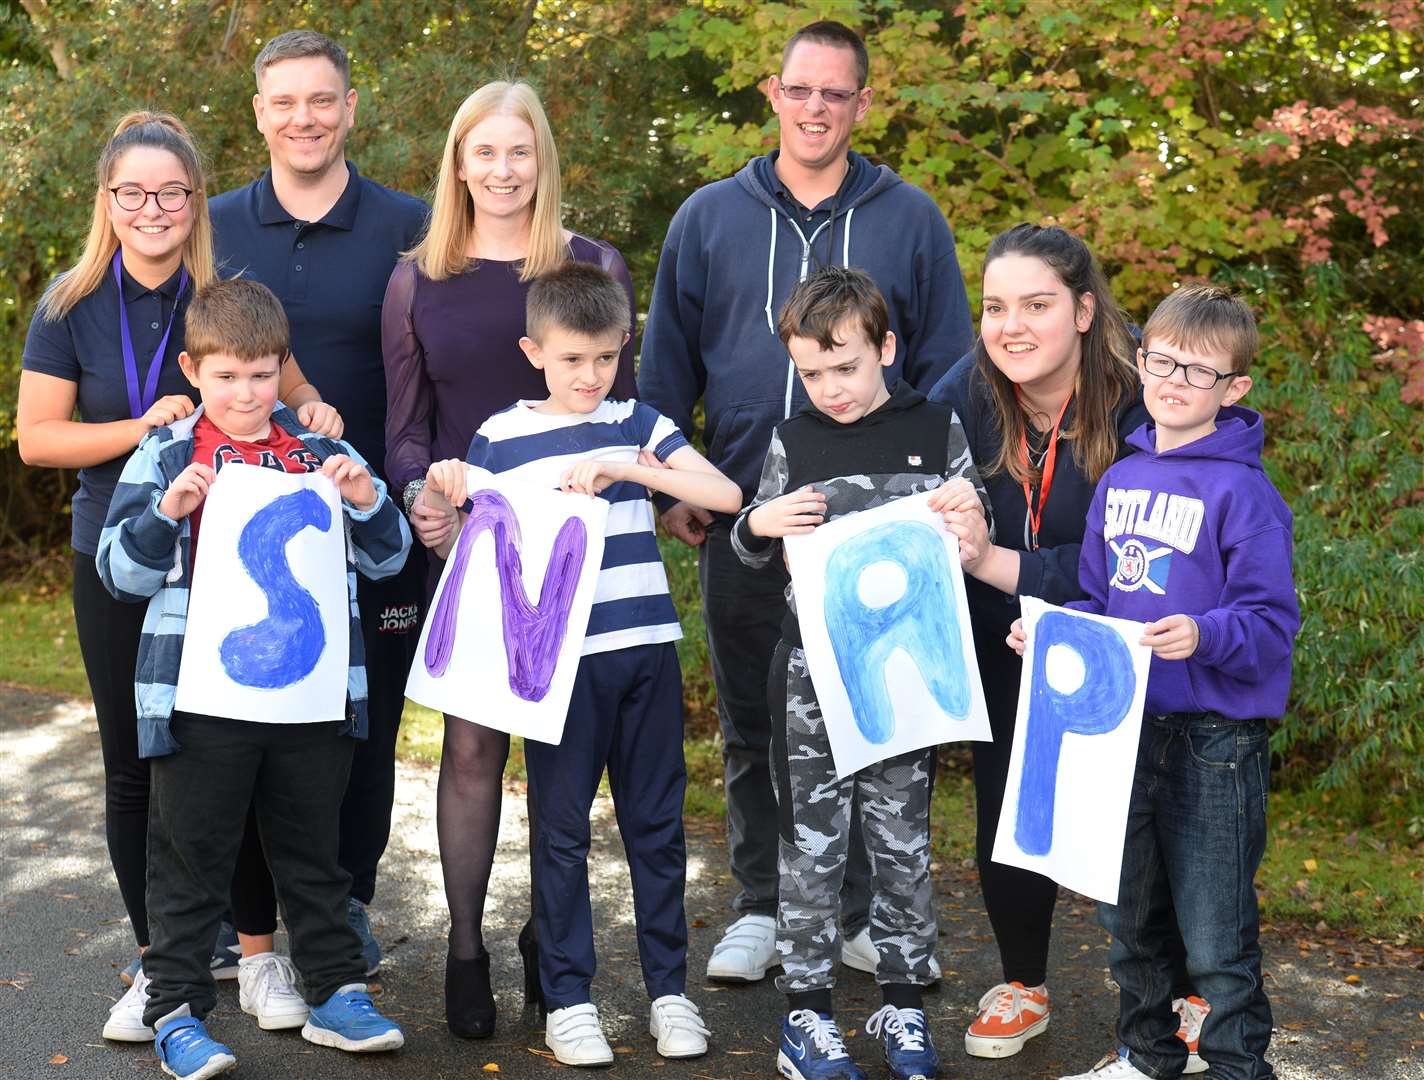 Snap service users (front, from left) Kieran MacPherson, Rory O'Brien, Logan Marshall and Rhys Ritchie-MacKenzie, with staff Emily Twaddle, Andrew Greig, fundraising mum Claire O'Brien, Dean Stewart and Katie Kay.